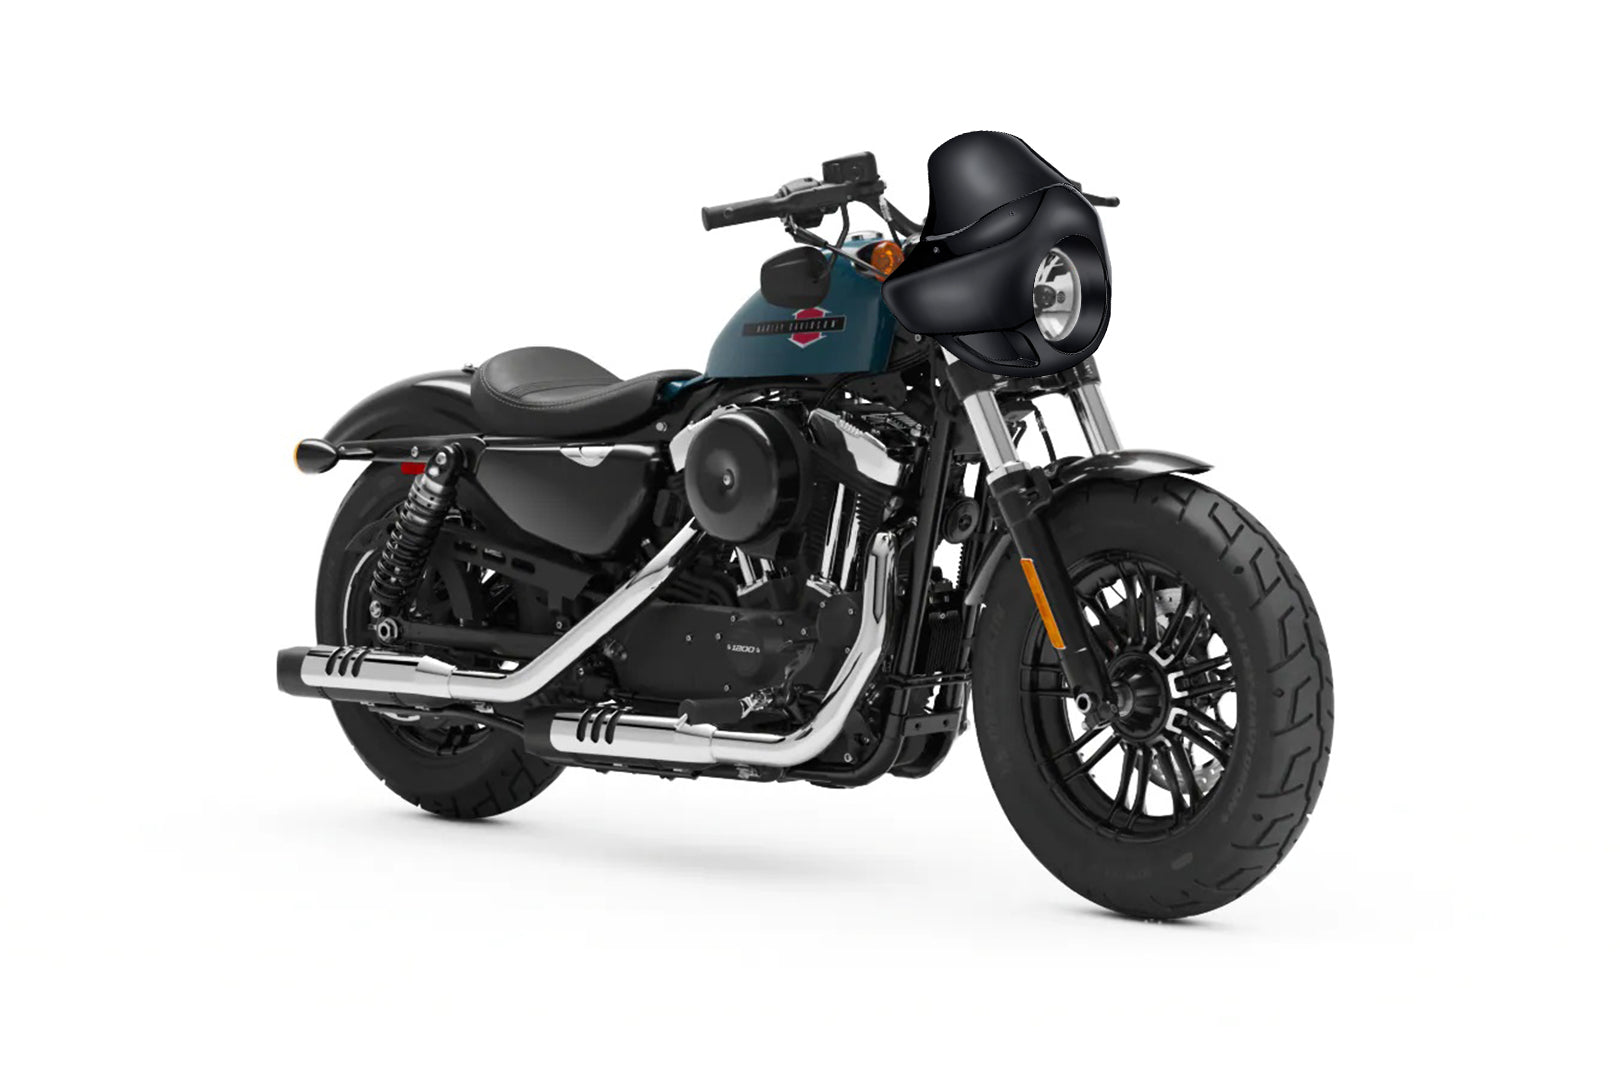 Viking Derby Motorcycle Fairing For Harley Sportster Forty Eight Gloss Black Bag on Bike View @expand